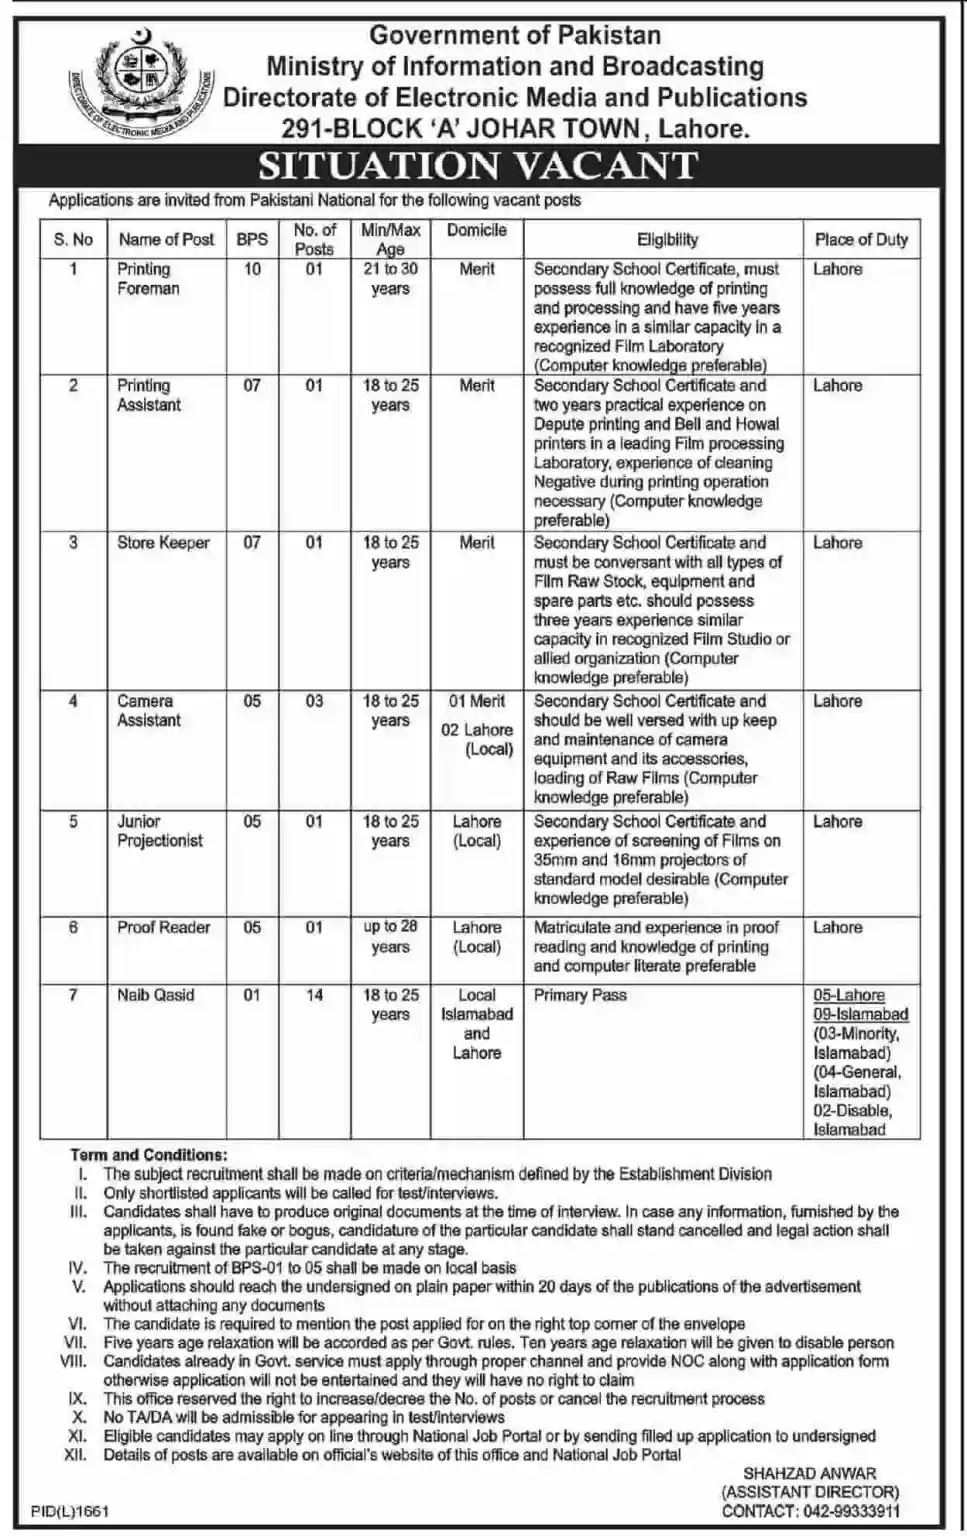 Ministry of Information and Broadcasting Jobs 2023 - MOIB Jobs 2023